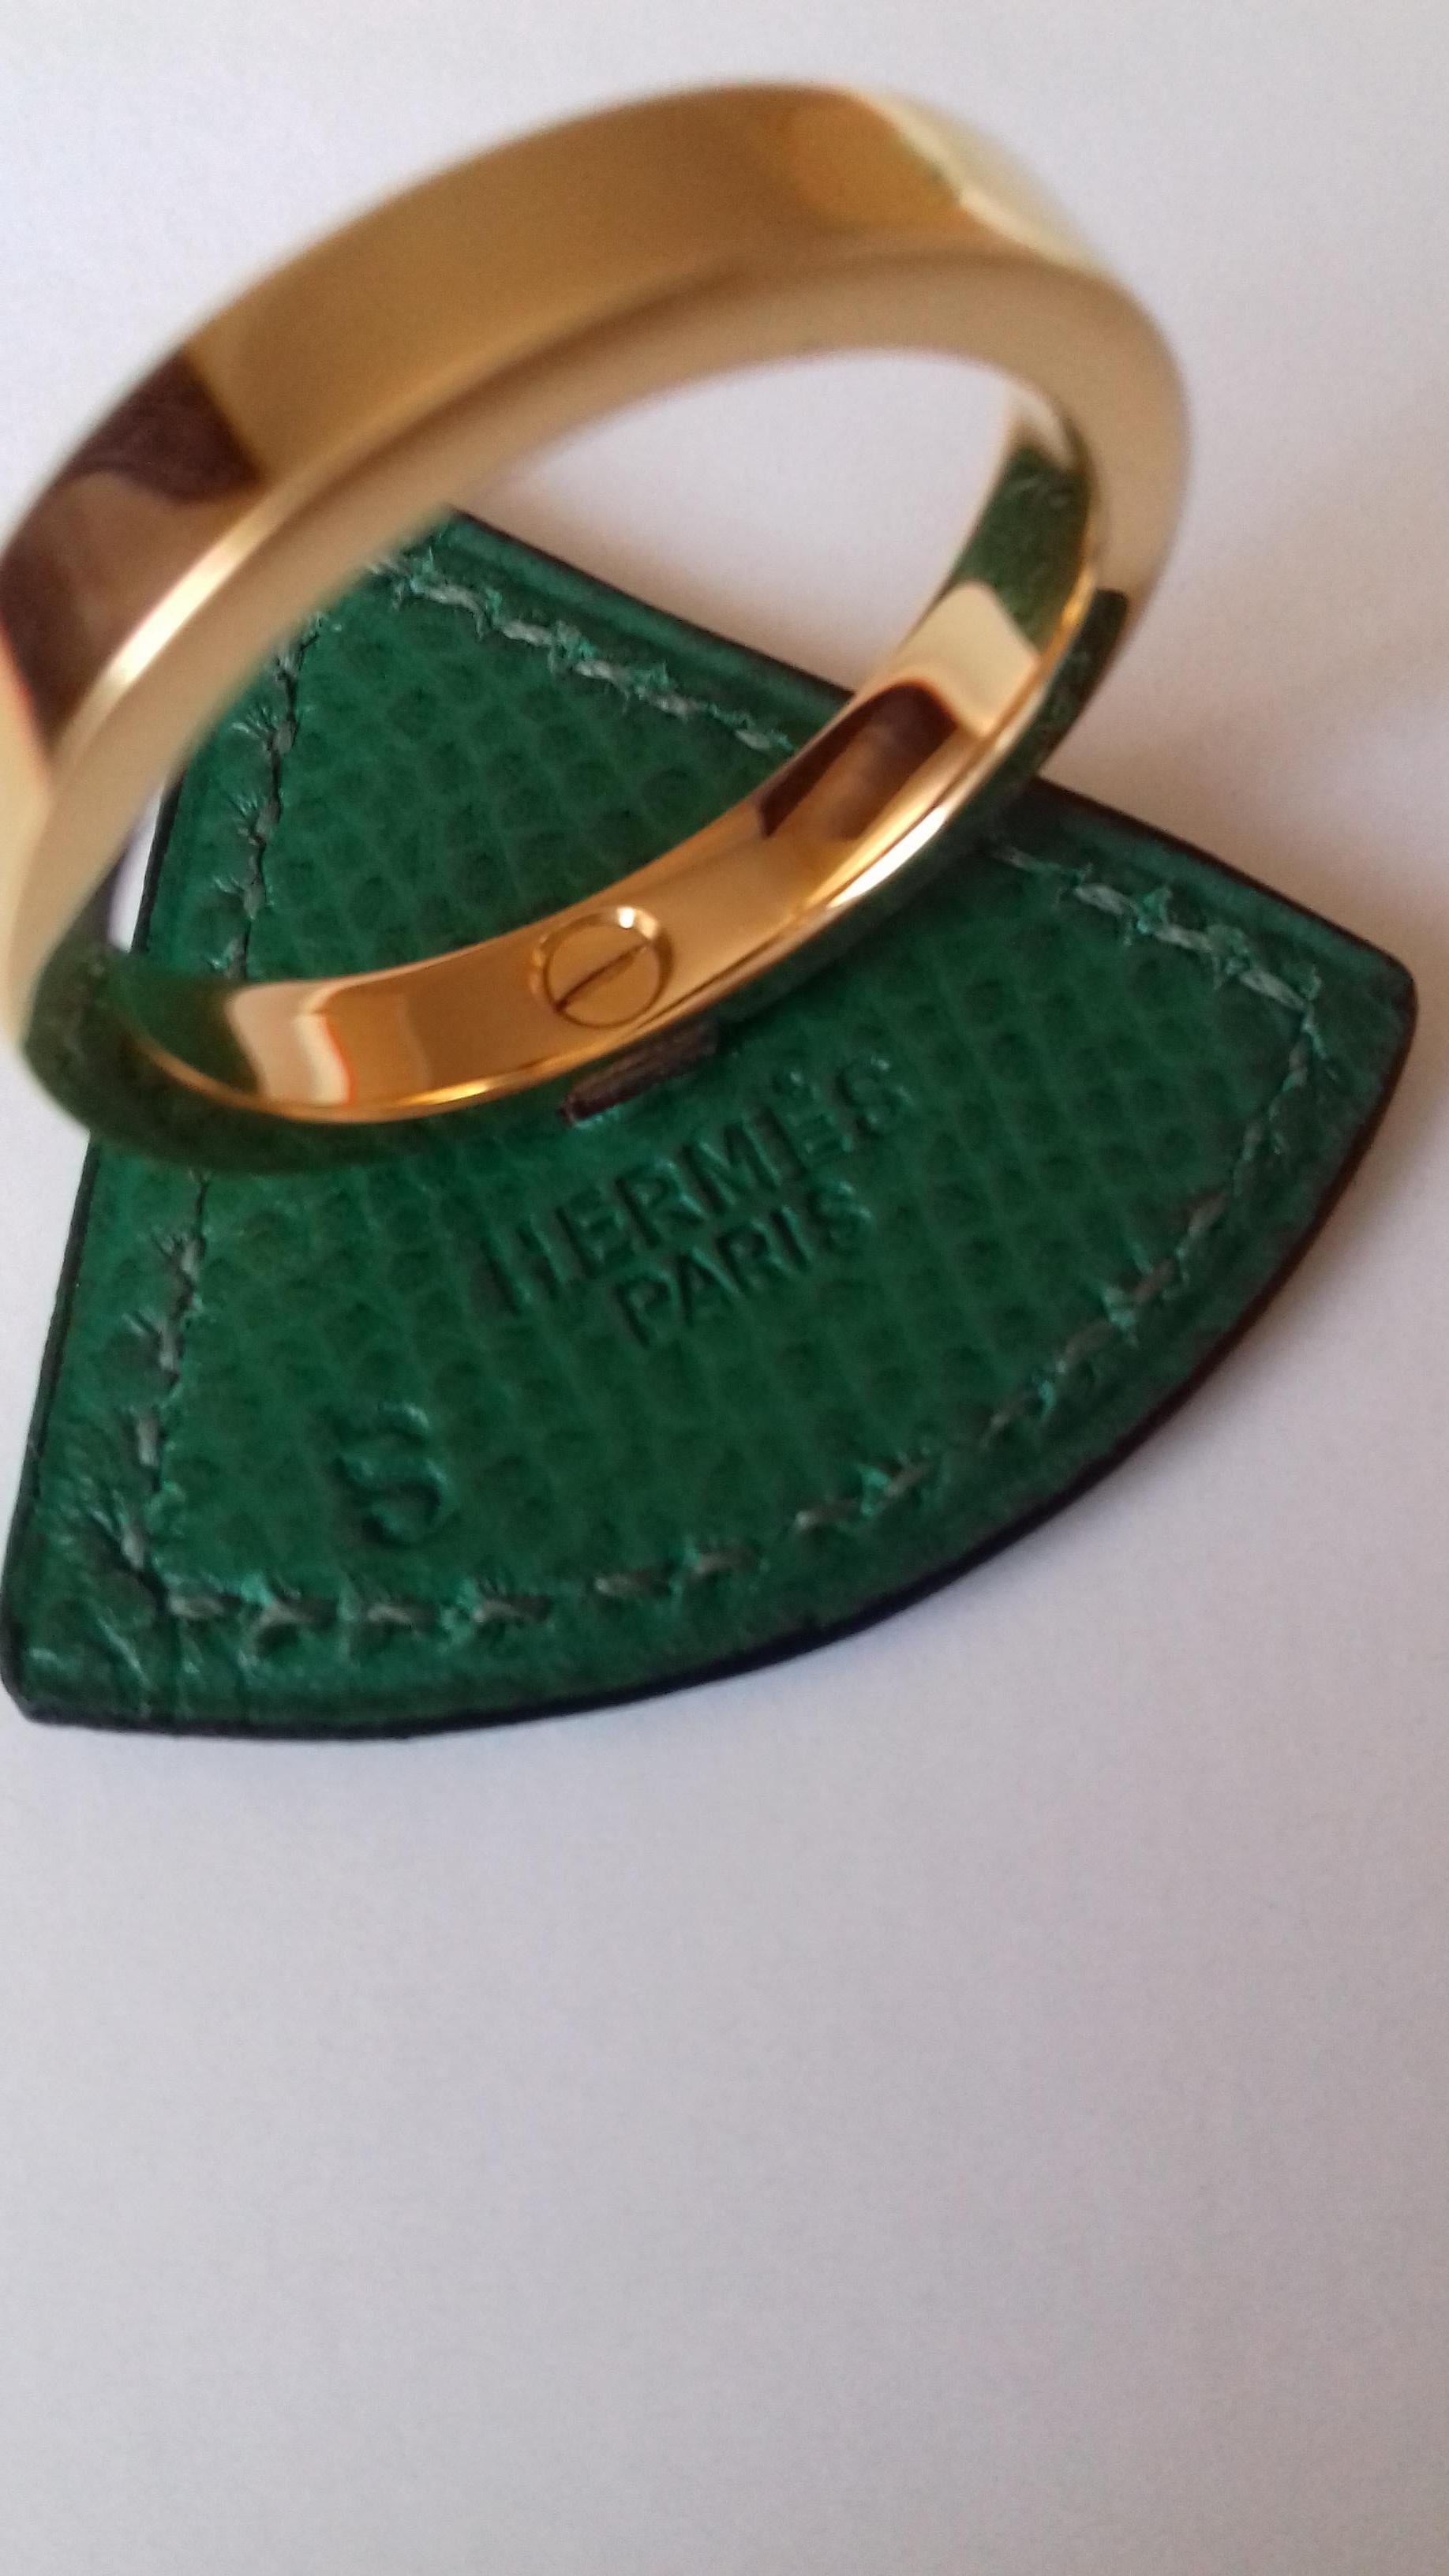 Hermès Ring Scarf of Jewel Ring in Green Courchevel Leather Golden Hdw RARE 1